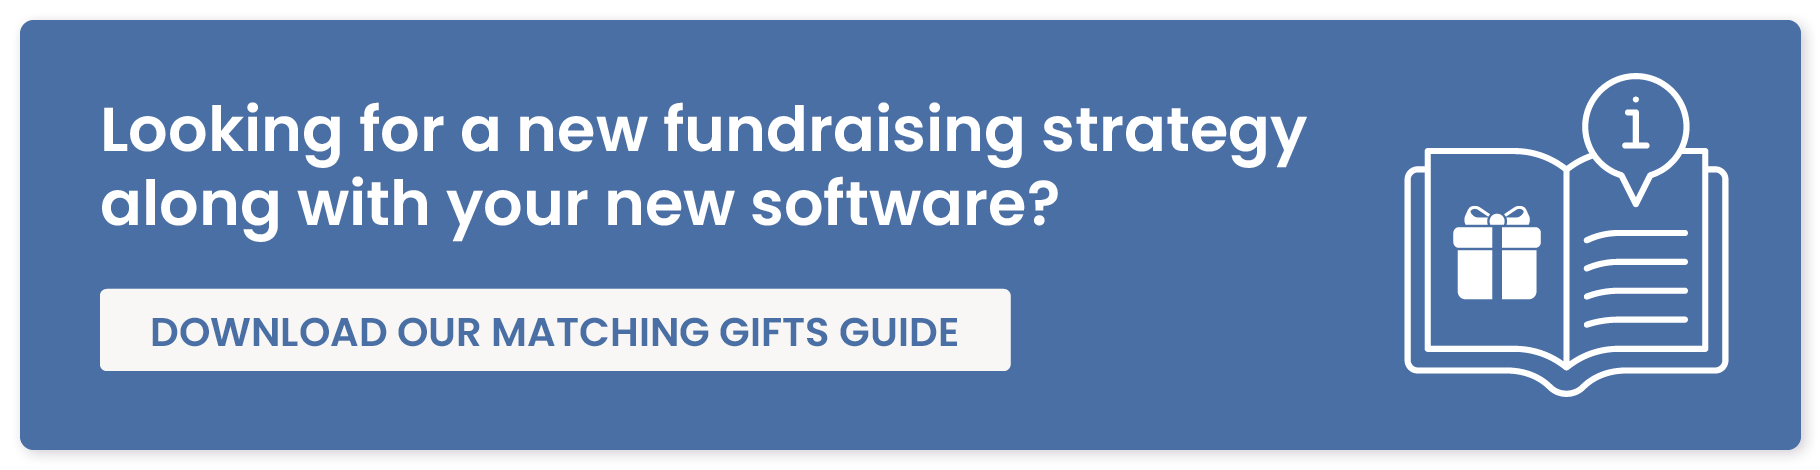 Looking for a new fundraising strategy along with your new software? Download our matching gifts guide. 